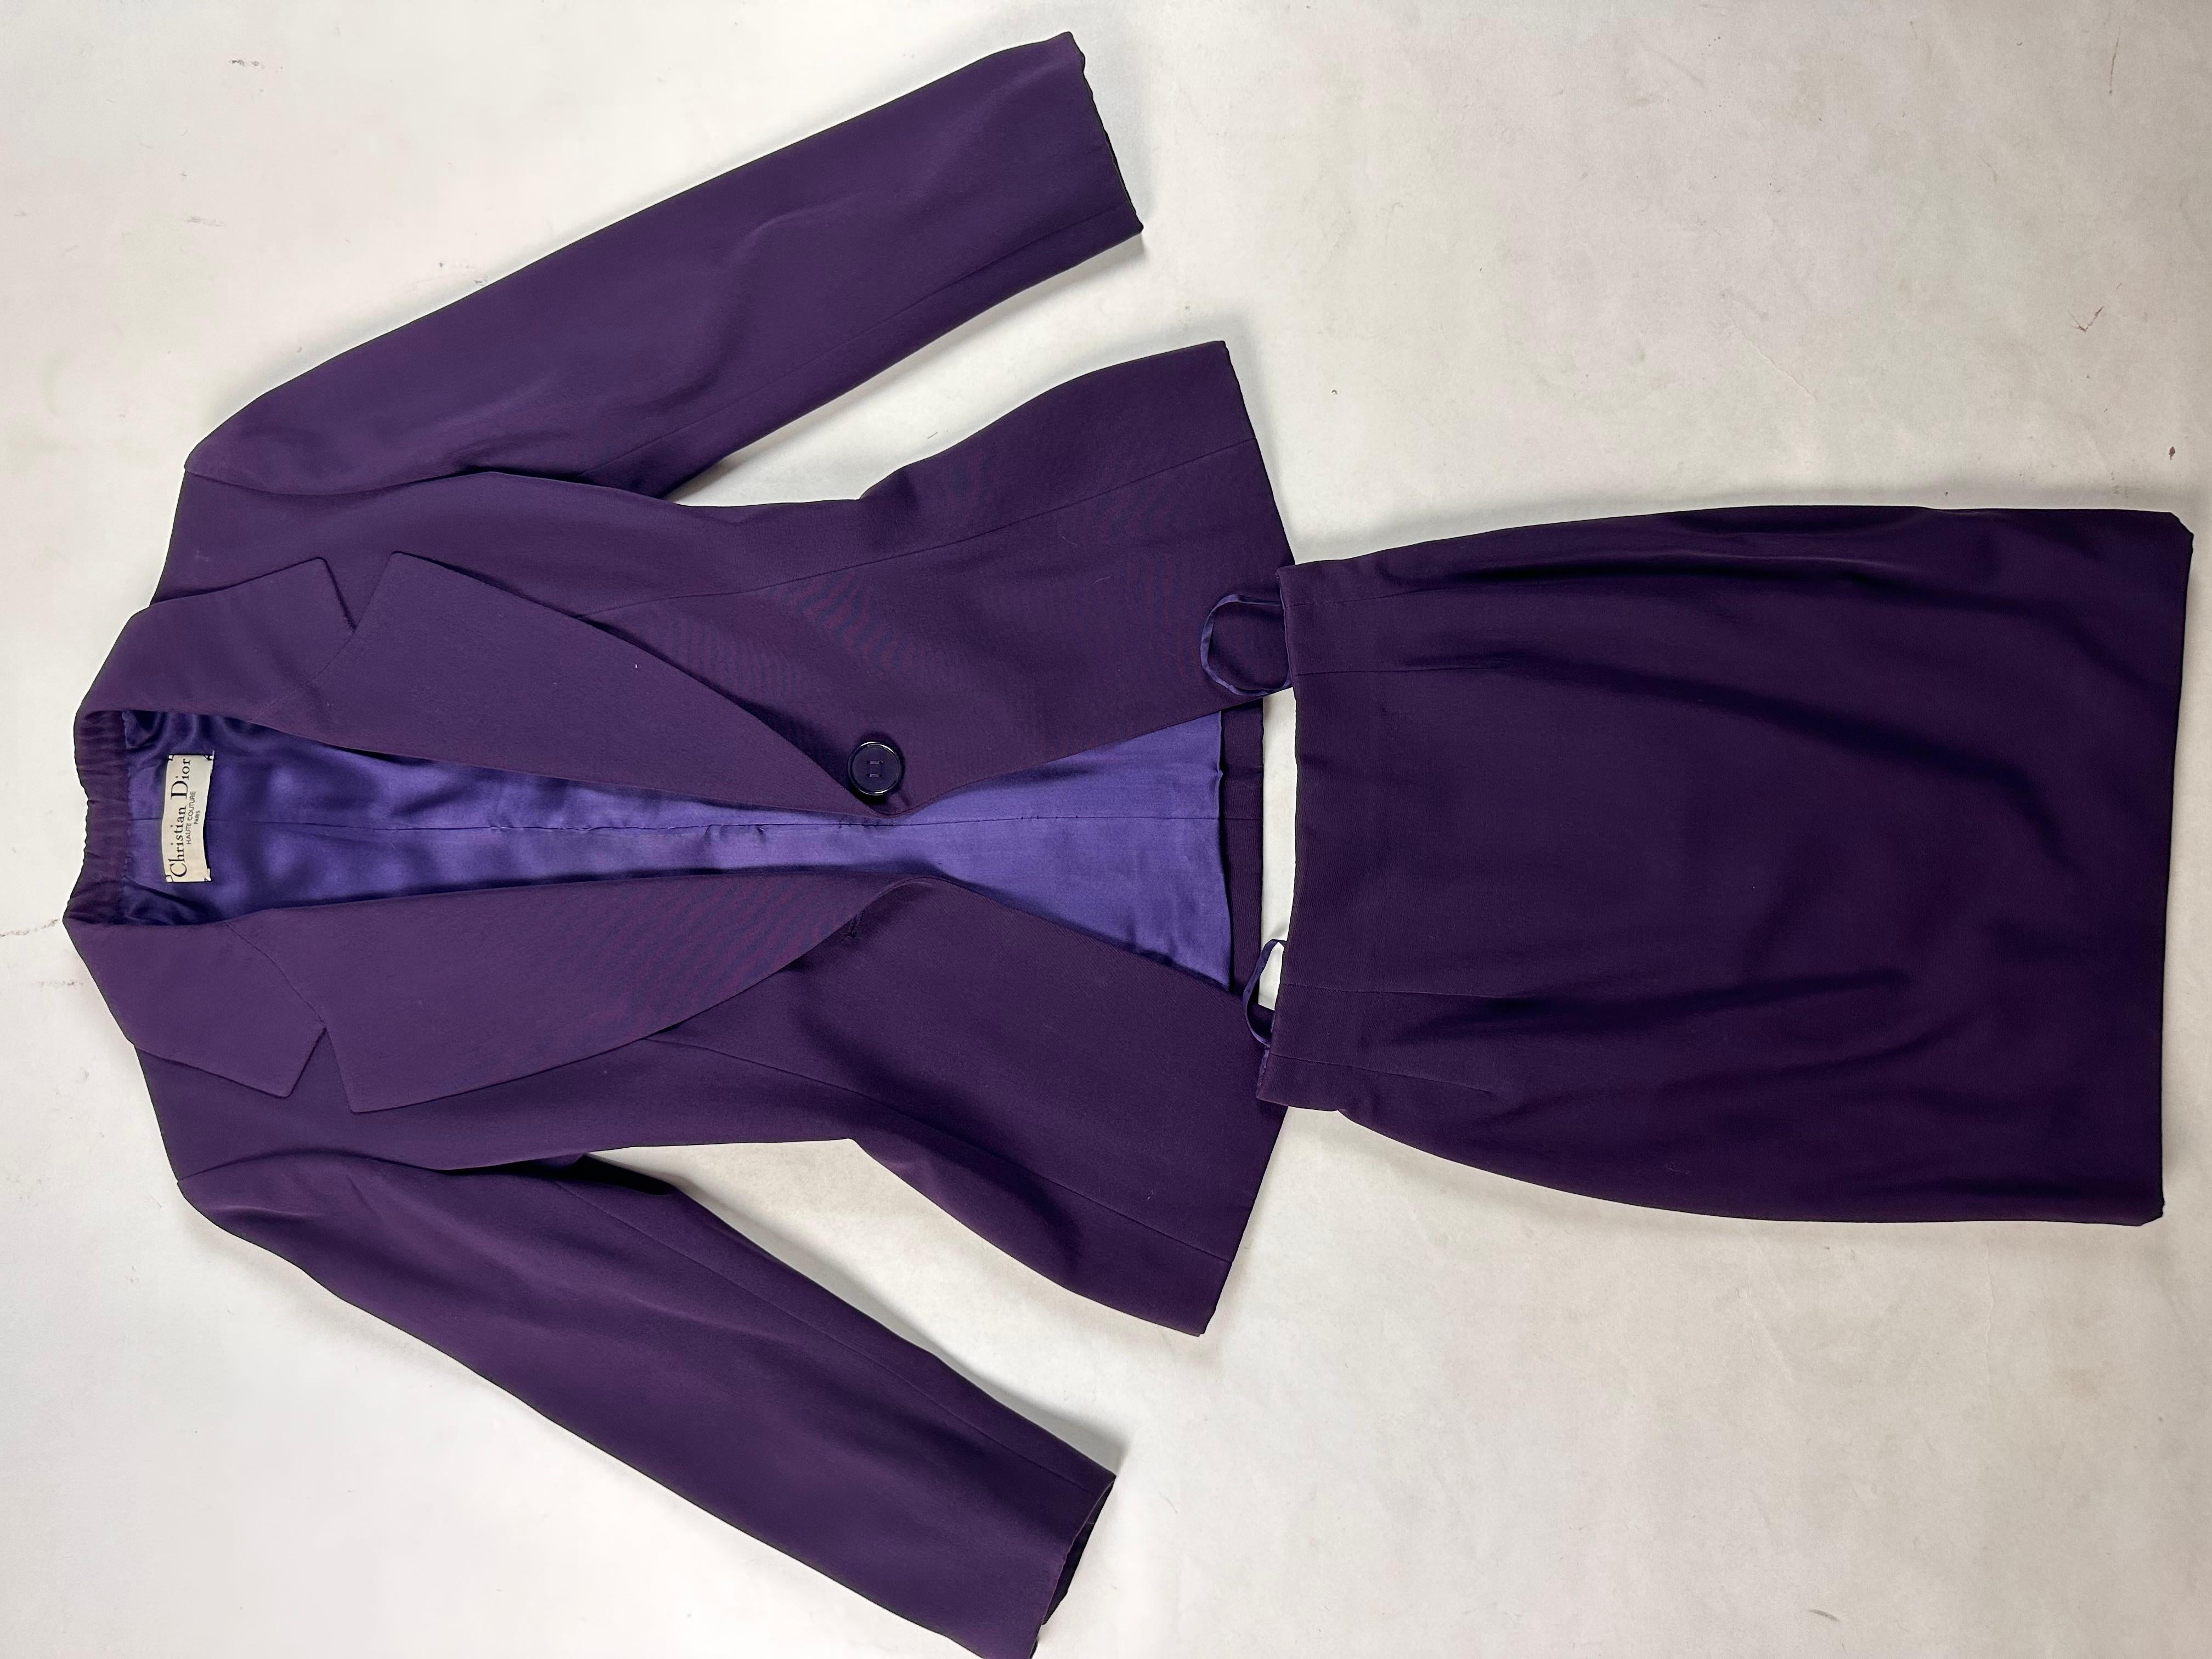 Skirt suit by Gianfranco Ferré for Christian Dior Haute Couture Circa 1995 For Sale 8